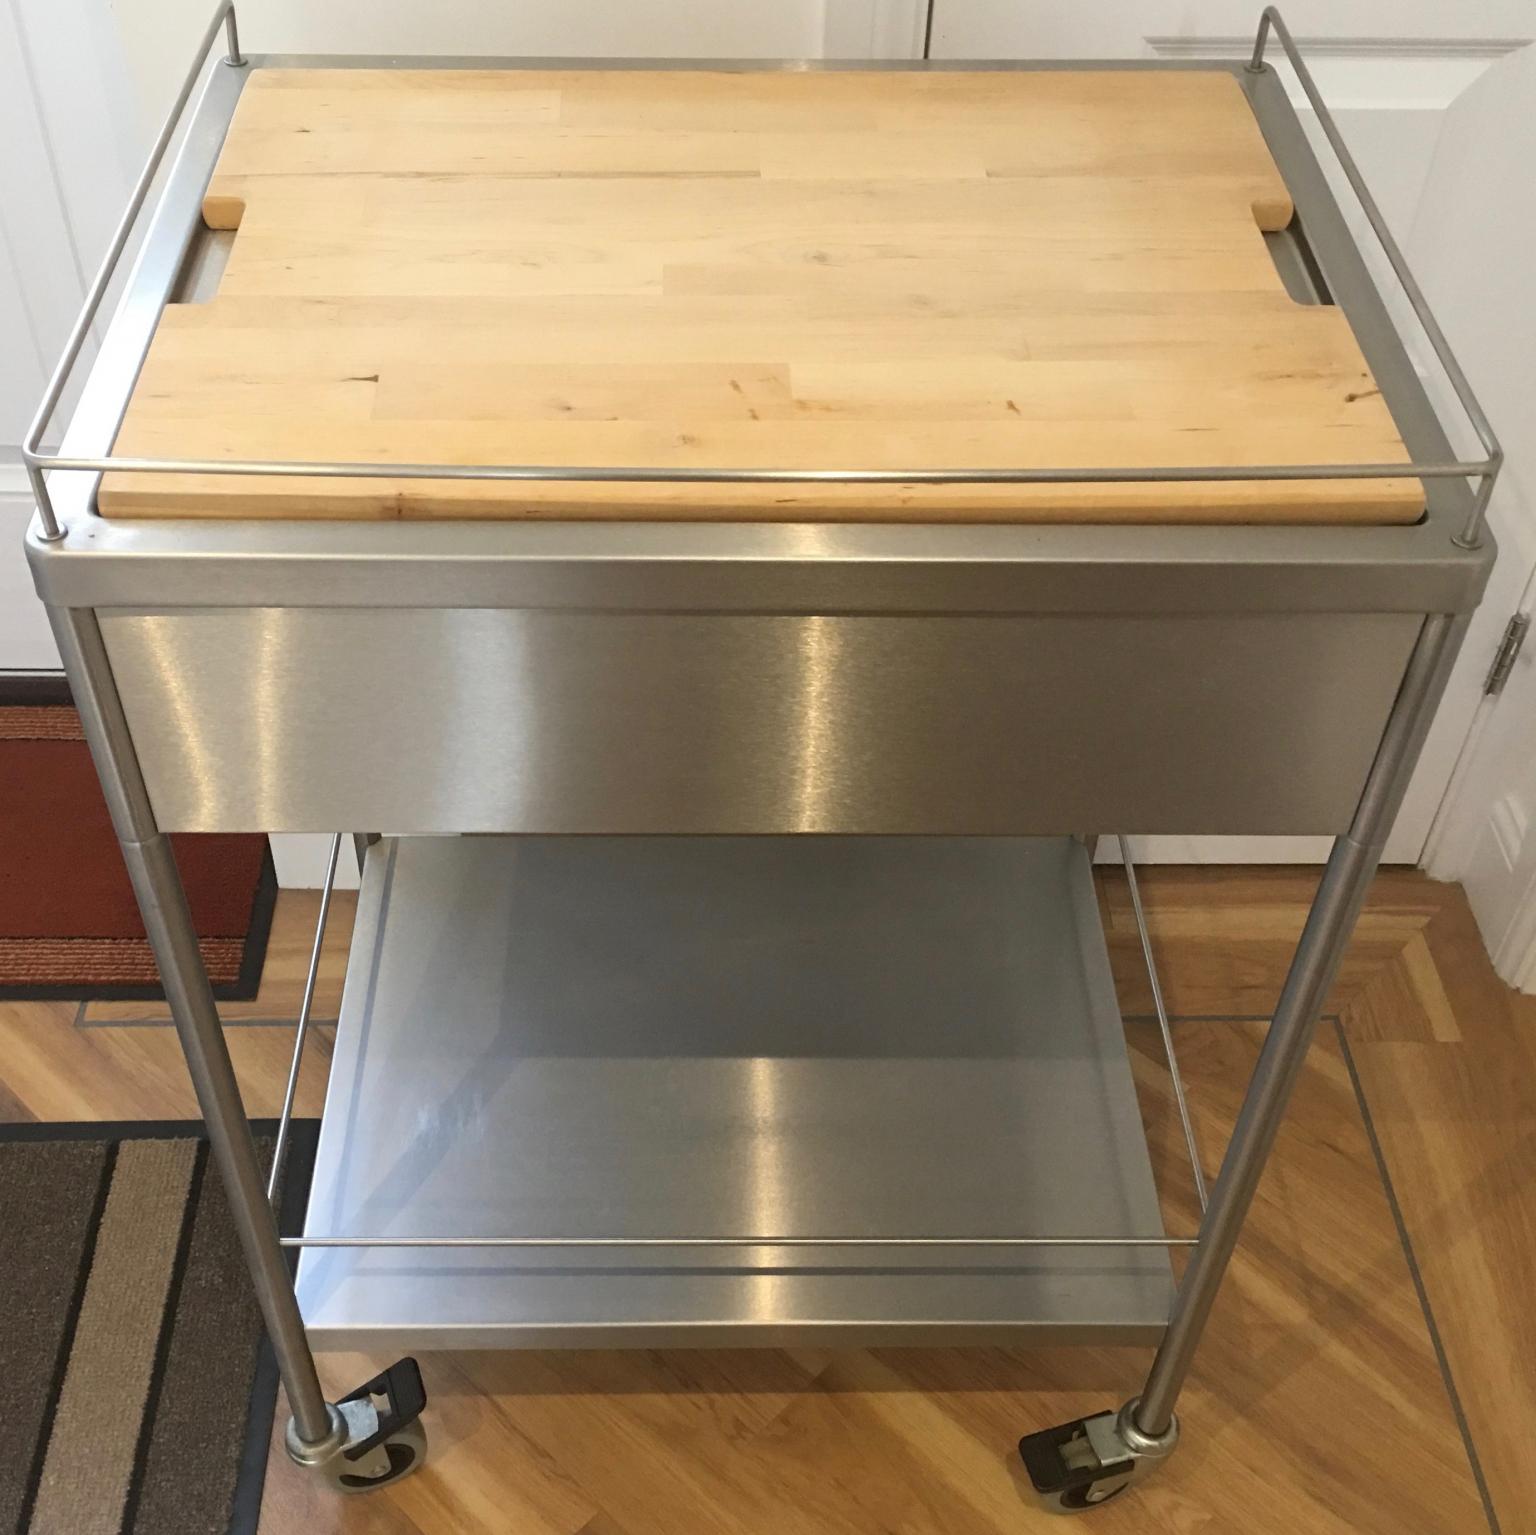 Ikea Flytta Kitchen Trolley Stainless Steel In Le18 Oadby And